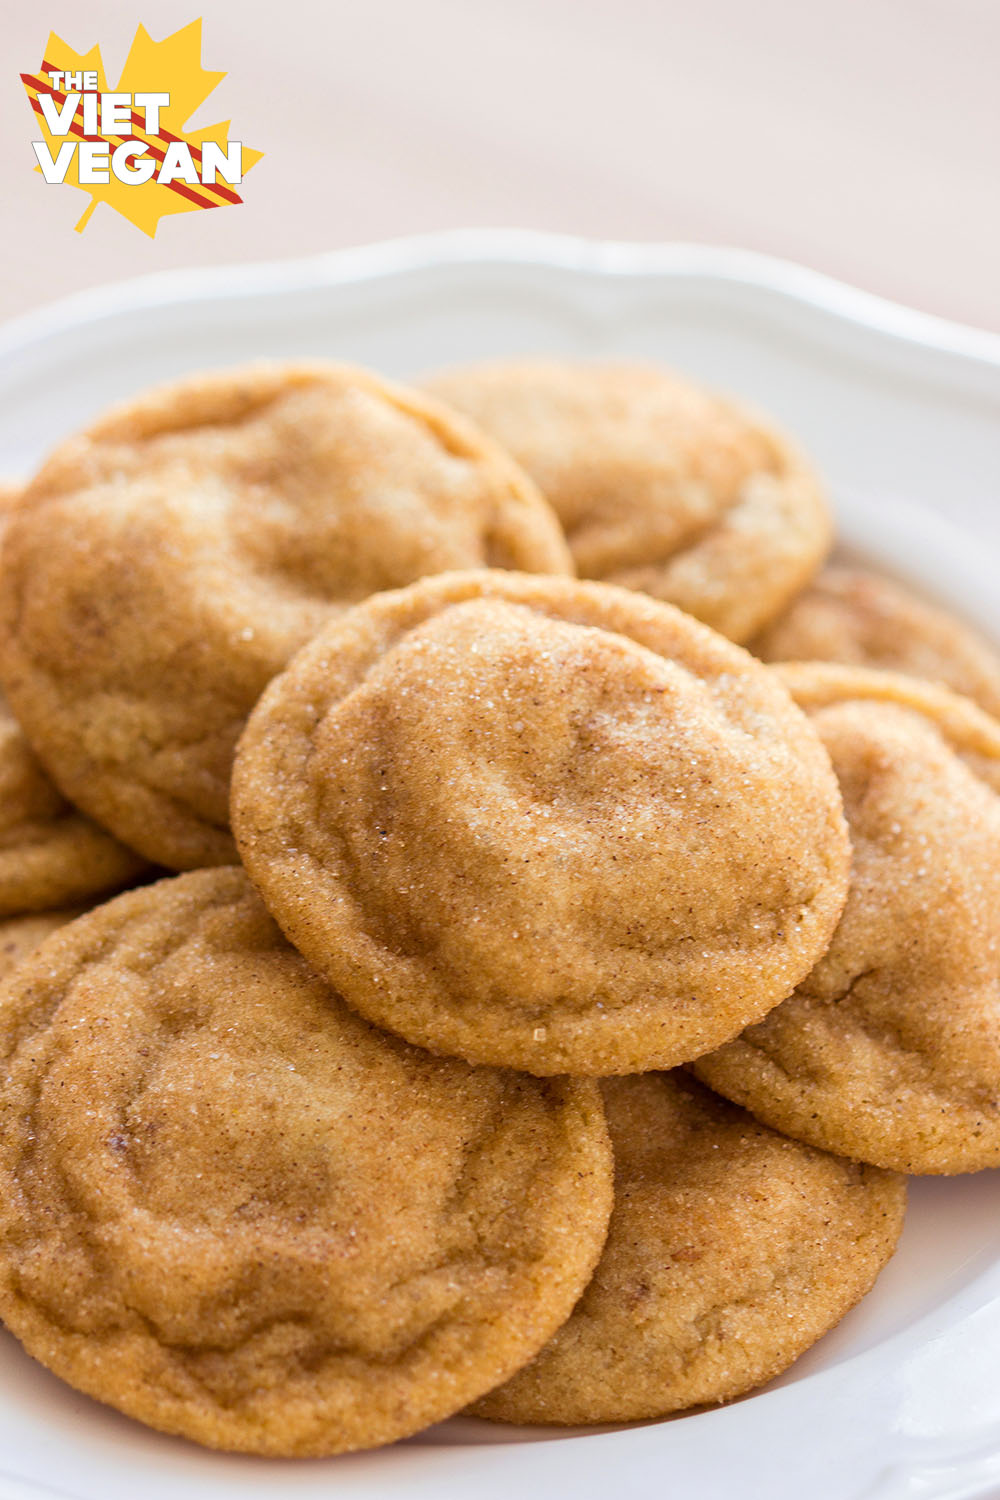 Vegan Snickerdoodles | The Viet Vegan | Soft, chewy center with a crisp edge. The PERFECT snickerdoodles!